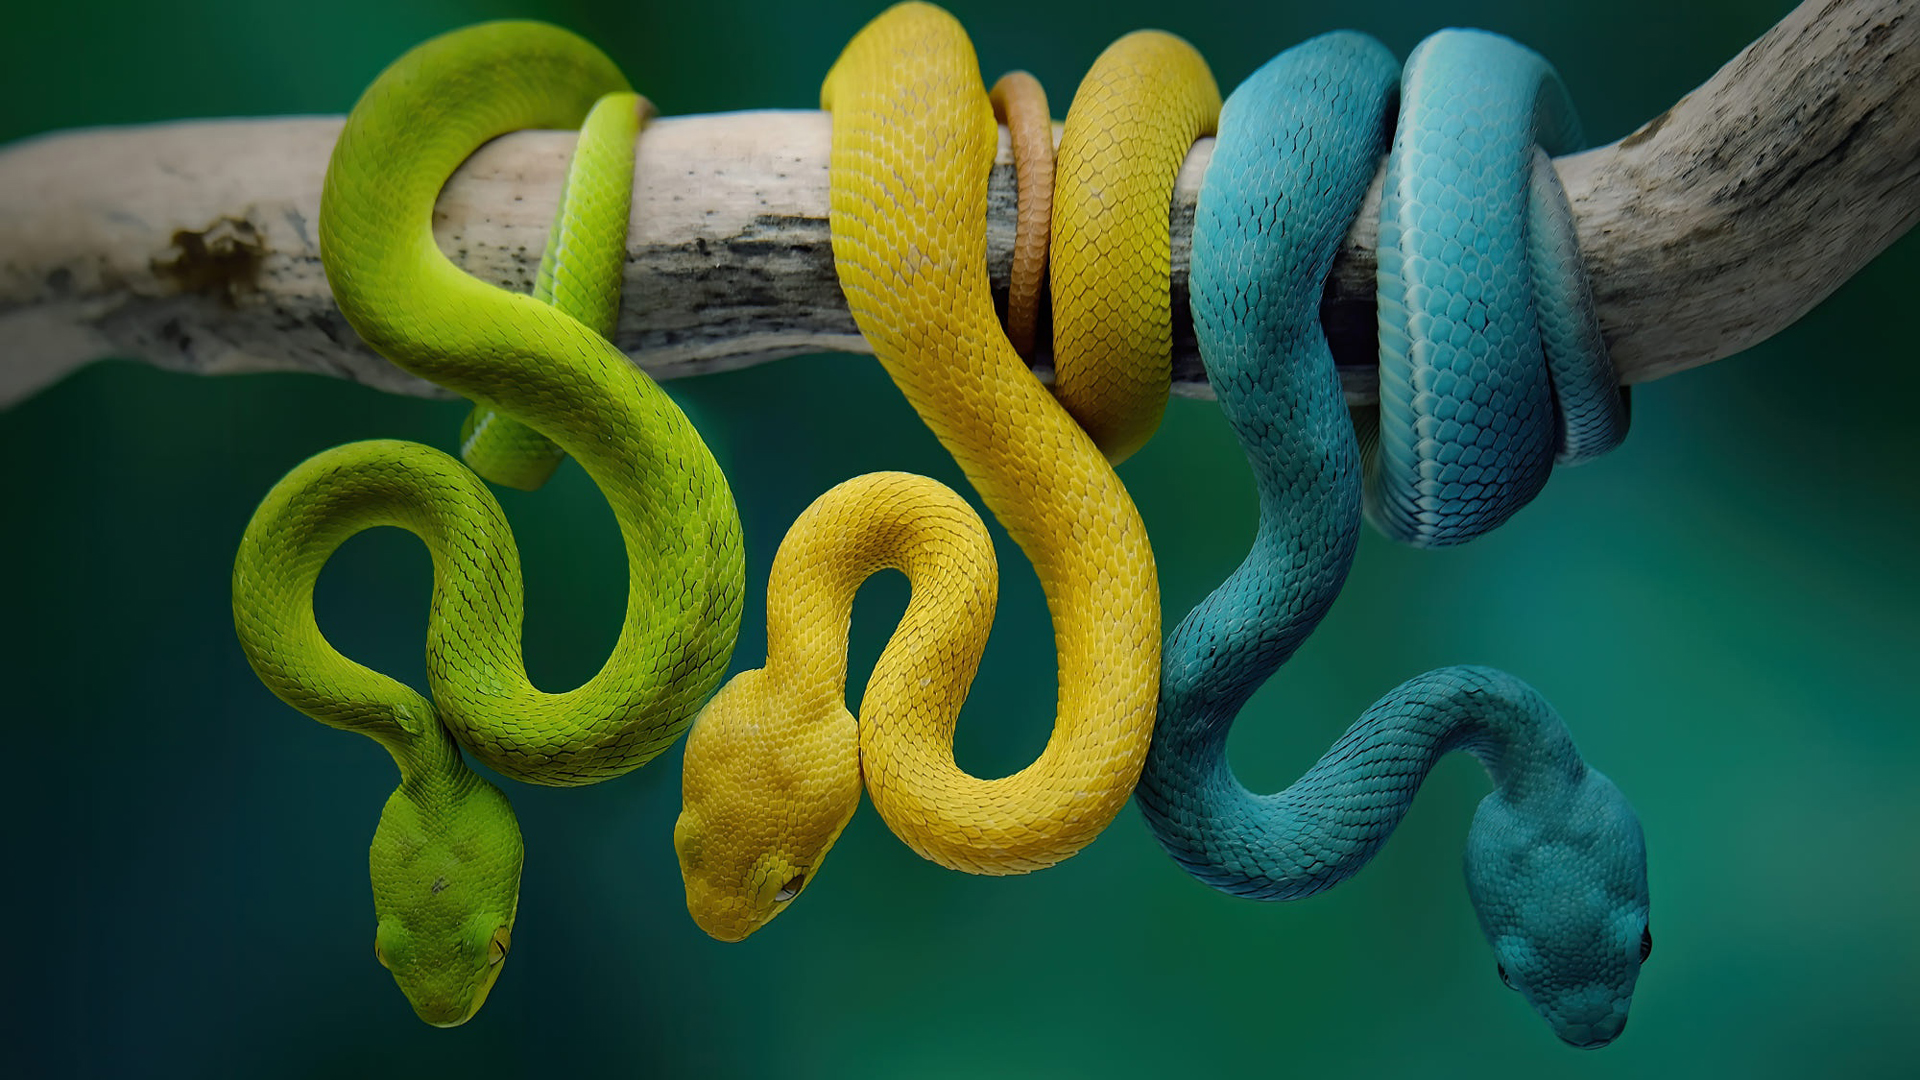 Green Yellow Blue Snakes On Tree Branch In Blur Teal Blue Wallpaper 2K Snake